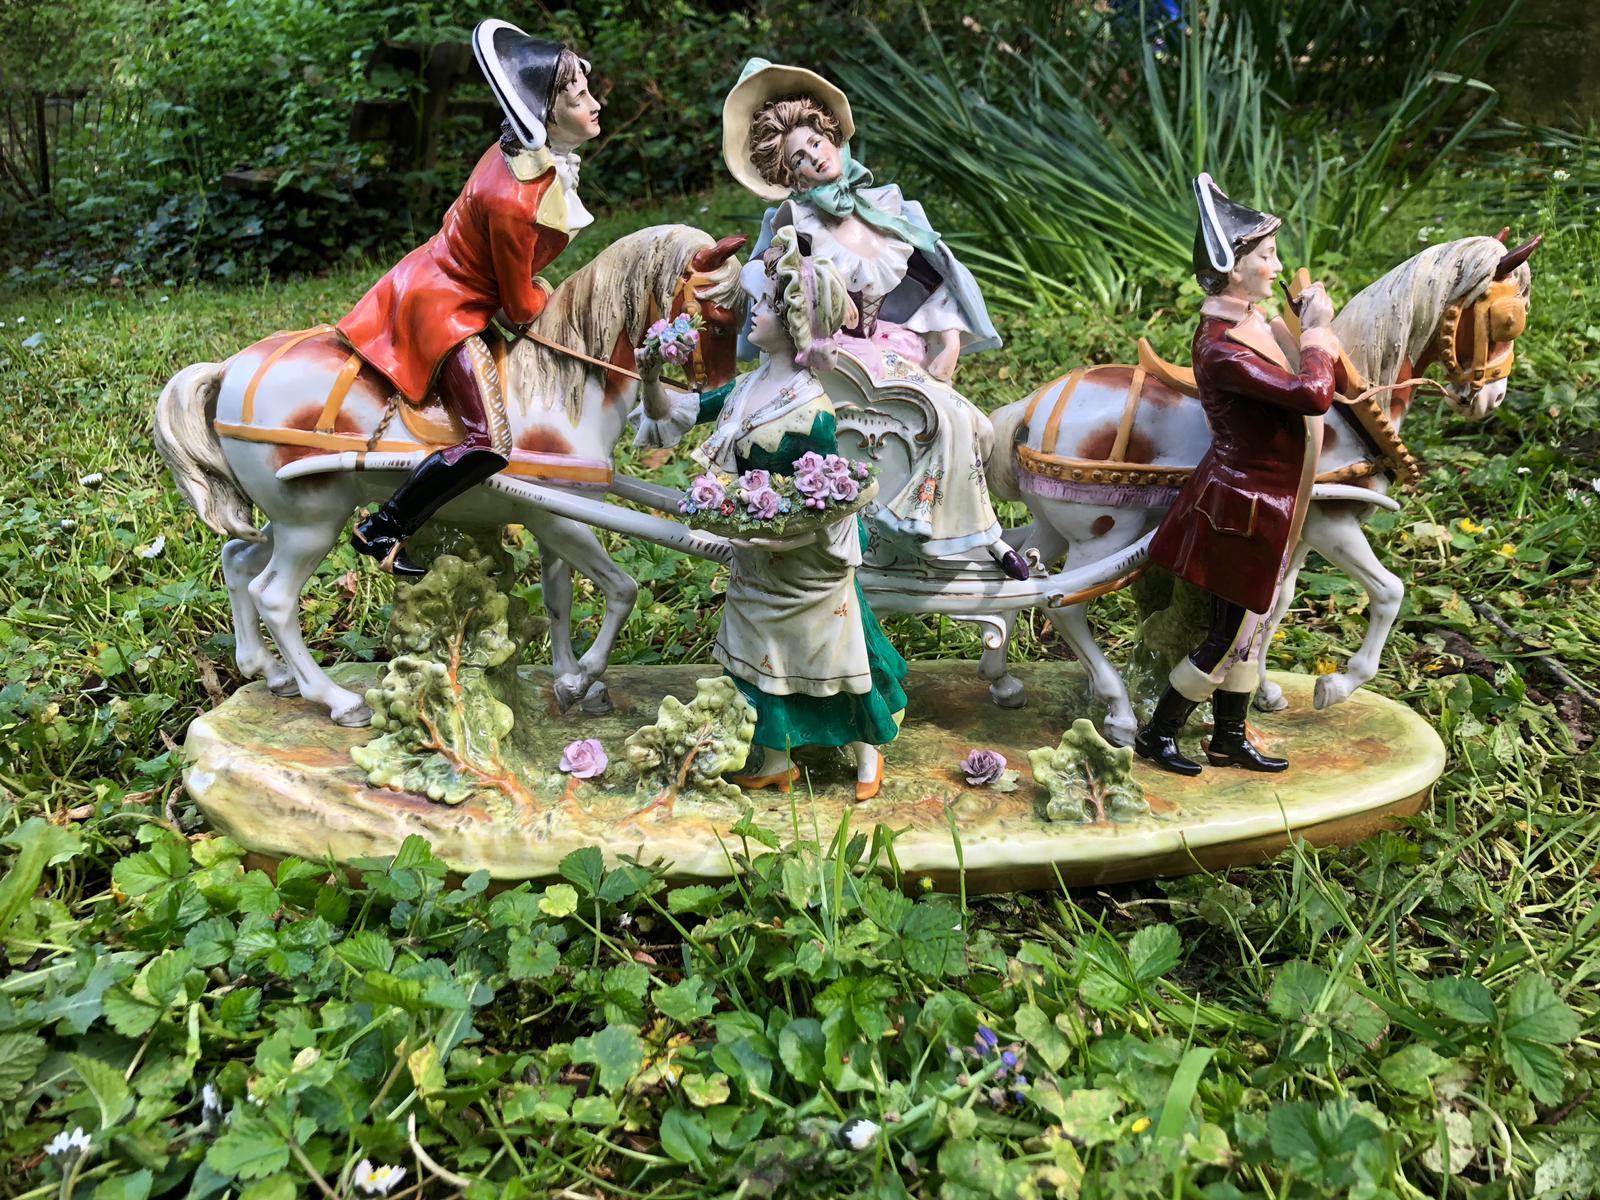 House of Scheibe Alsbach founded in 1835. The porcelain figures are manufactured in Germany, before 1989. The figures are a love couple, a flower girl and a horse boy. They are on the horse-drawn carriage.
The figures are handmade from porcelain